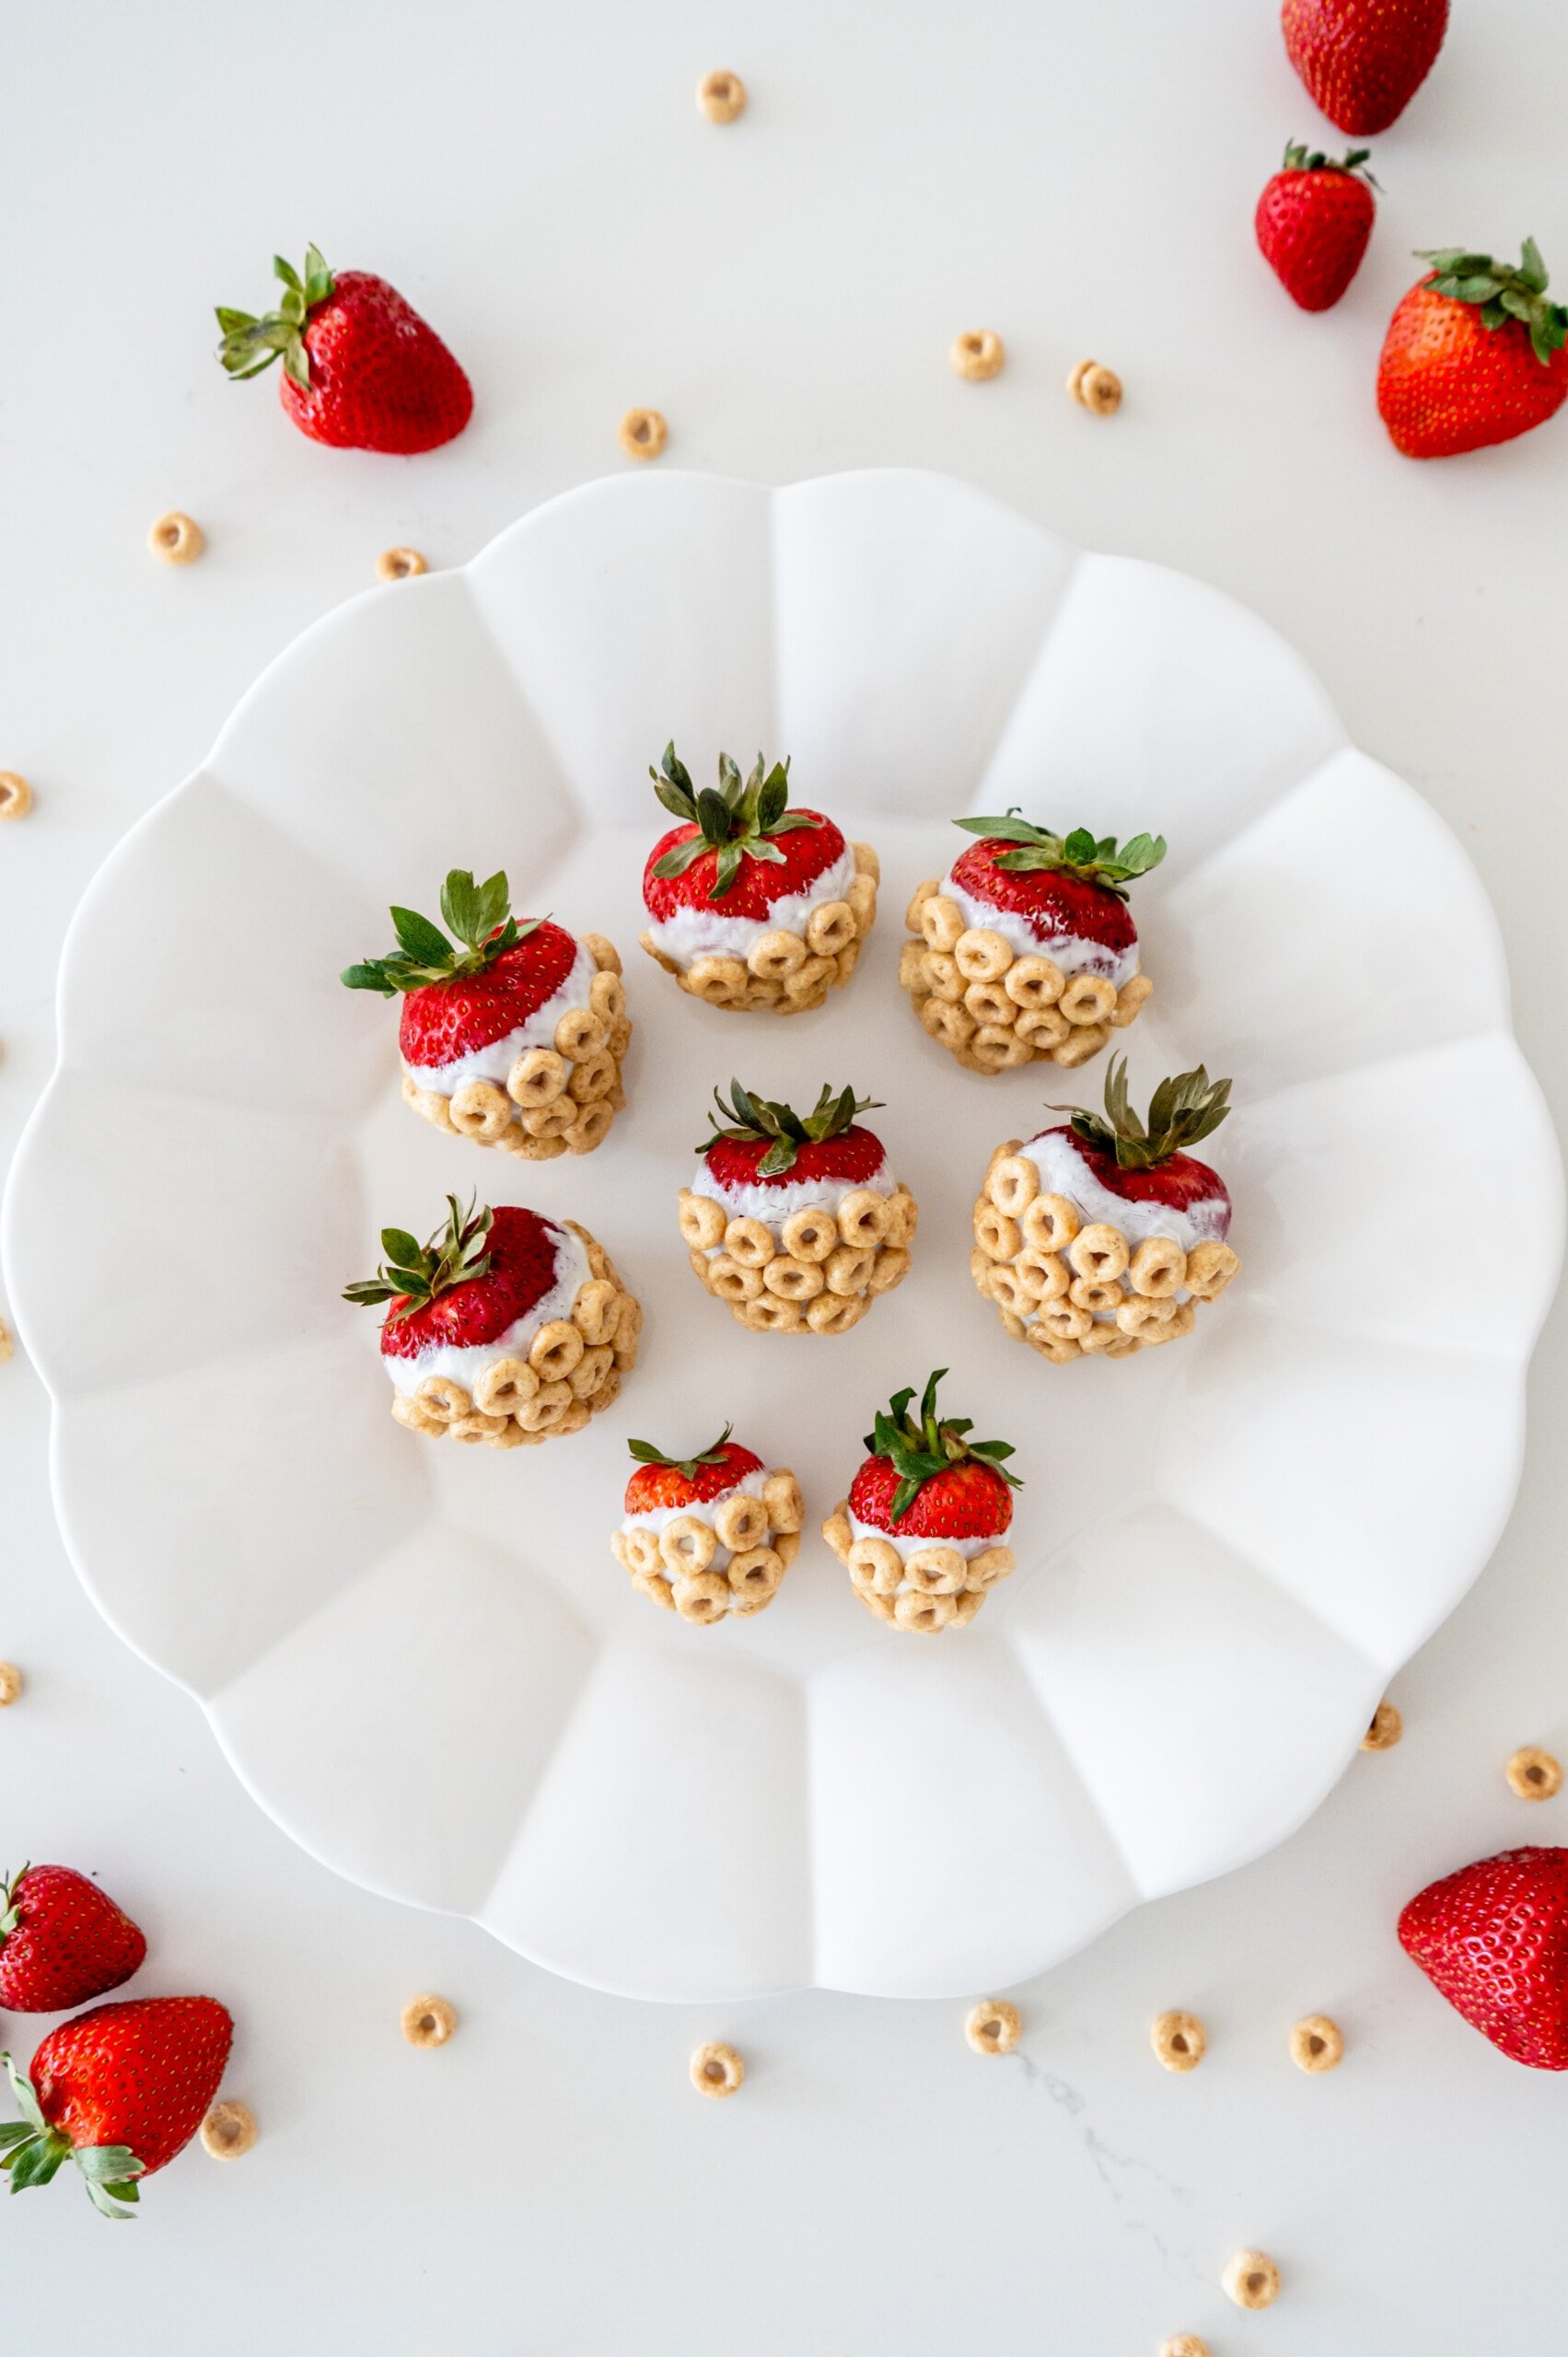 Strawberries dipped in yogurt and covered with Cheerios on a white plate in a white kitchen. There are strawberries and Cheerios scattered around.